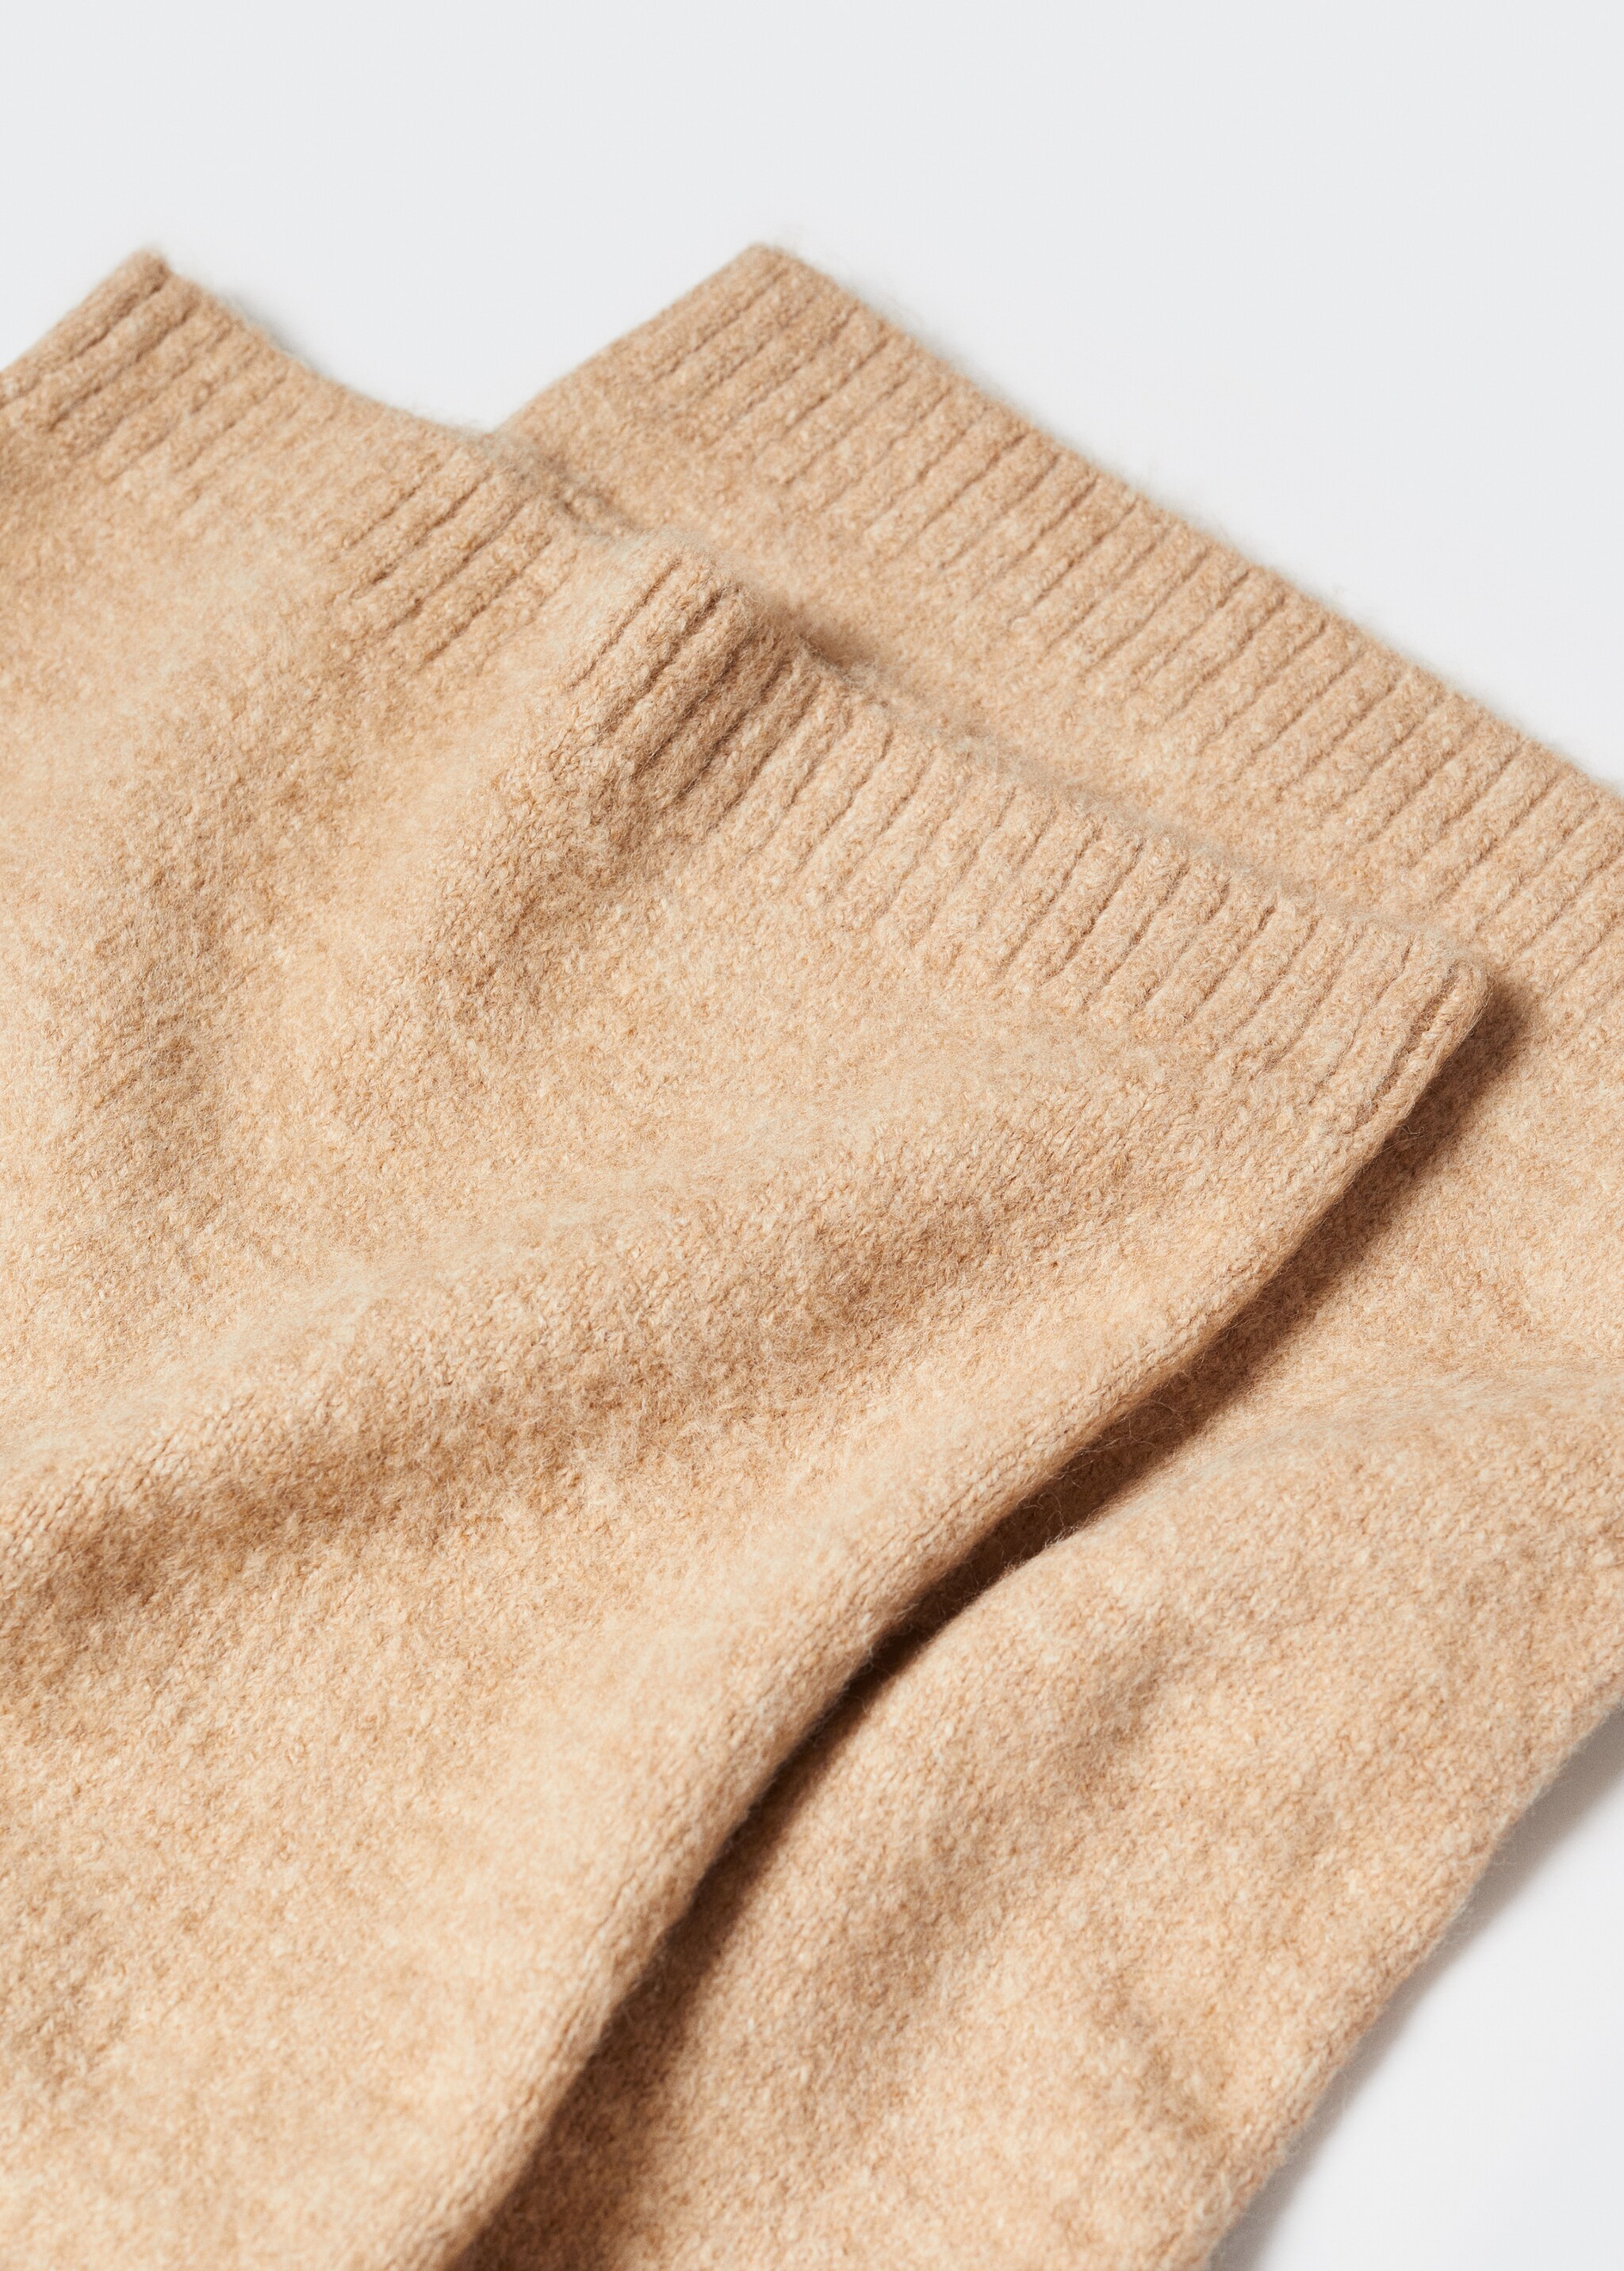 Knit trousers - Details of the article 8